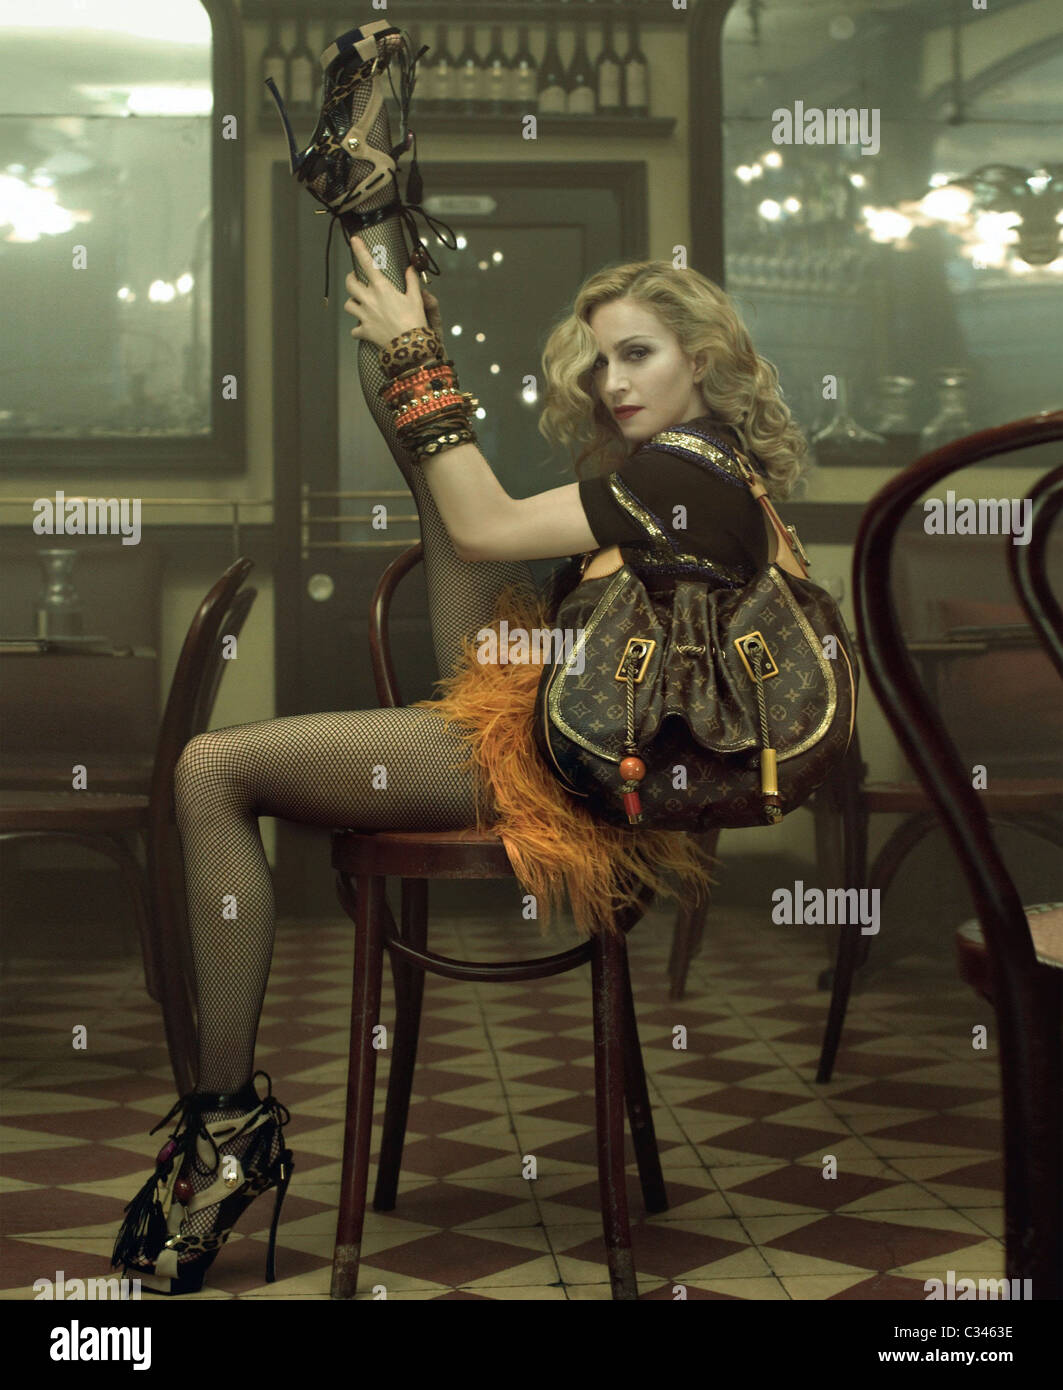 Madonna stars in the new Louis Vuitton Advertising Campaign for